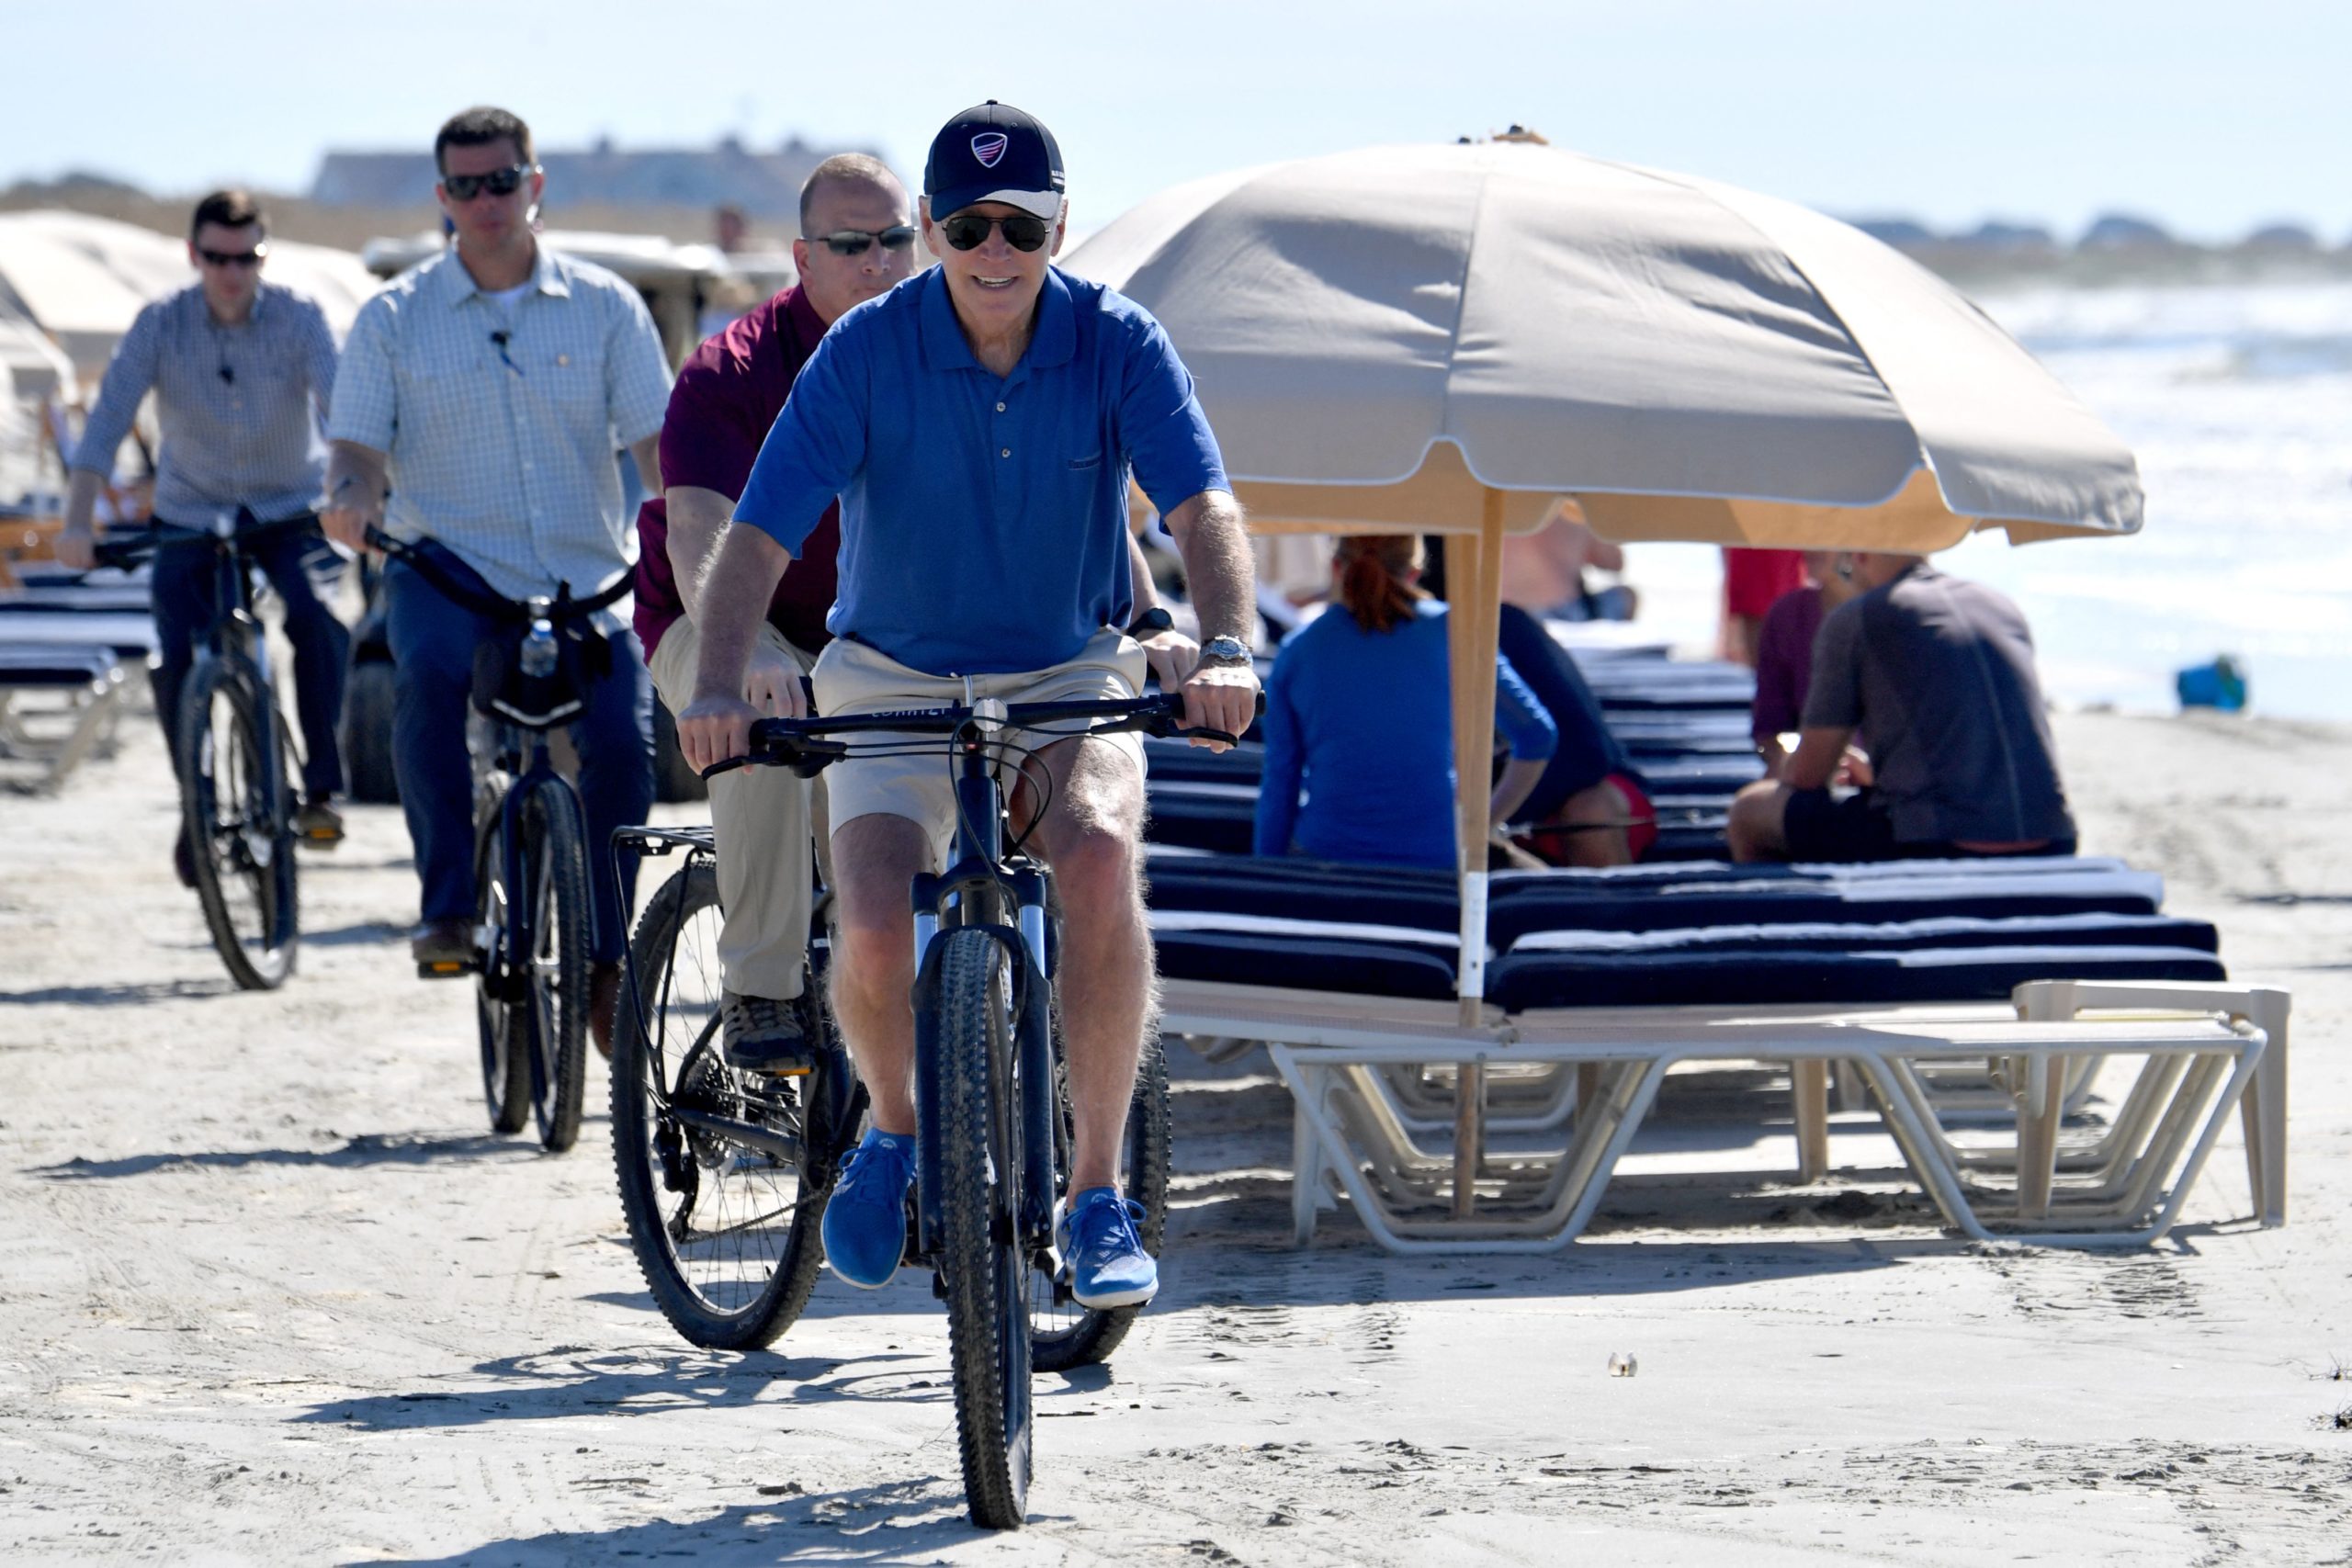 US President Joe Biden rides his bicycle along the beach while on vacation in Kiawah Island, South Carolina, on August 14, 2022. (Photo by Nicholas Kamm / AFP) (Photo by NICHOLAS KAMM/AFP via Getty Images)